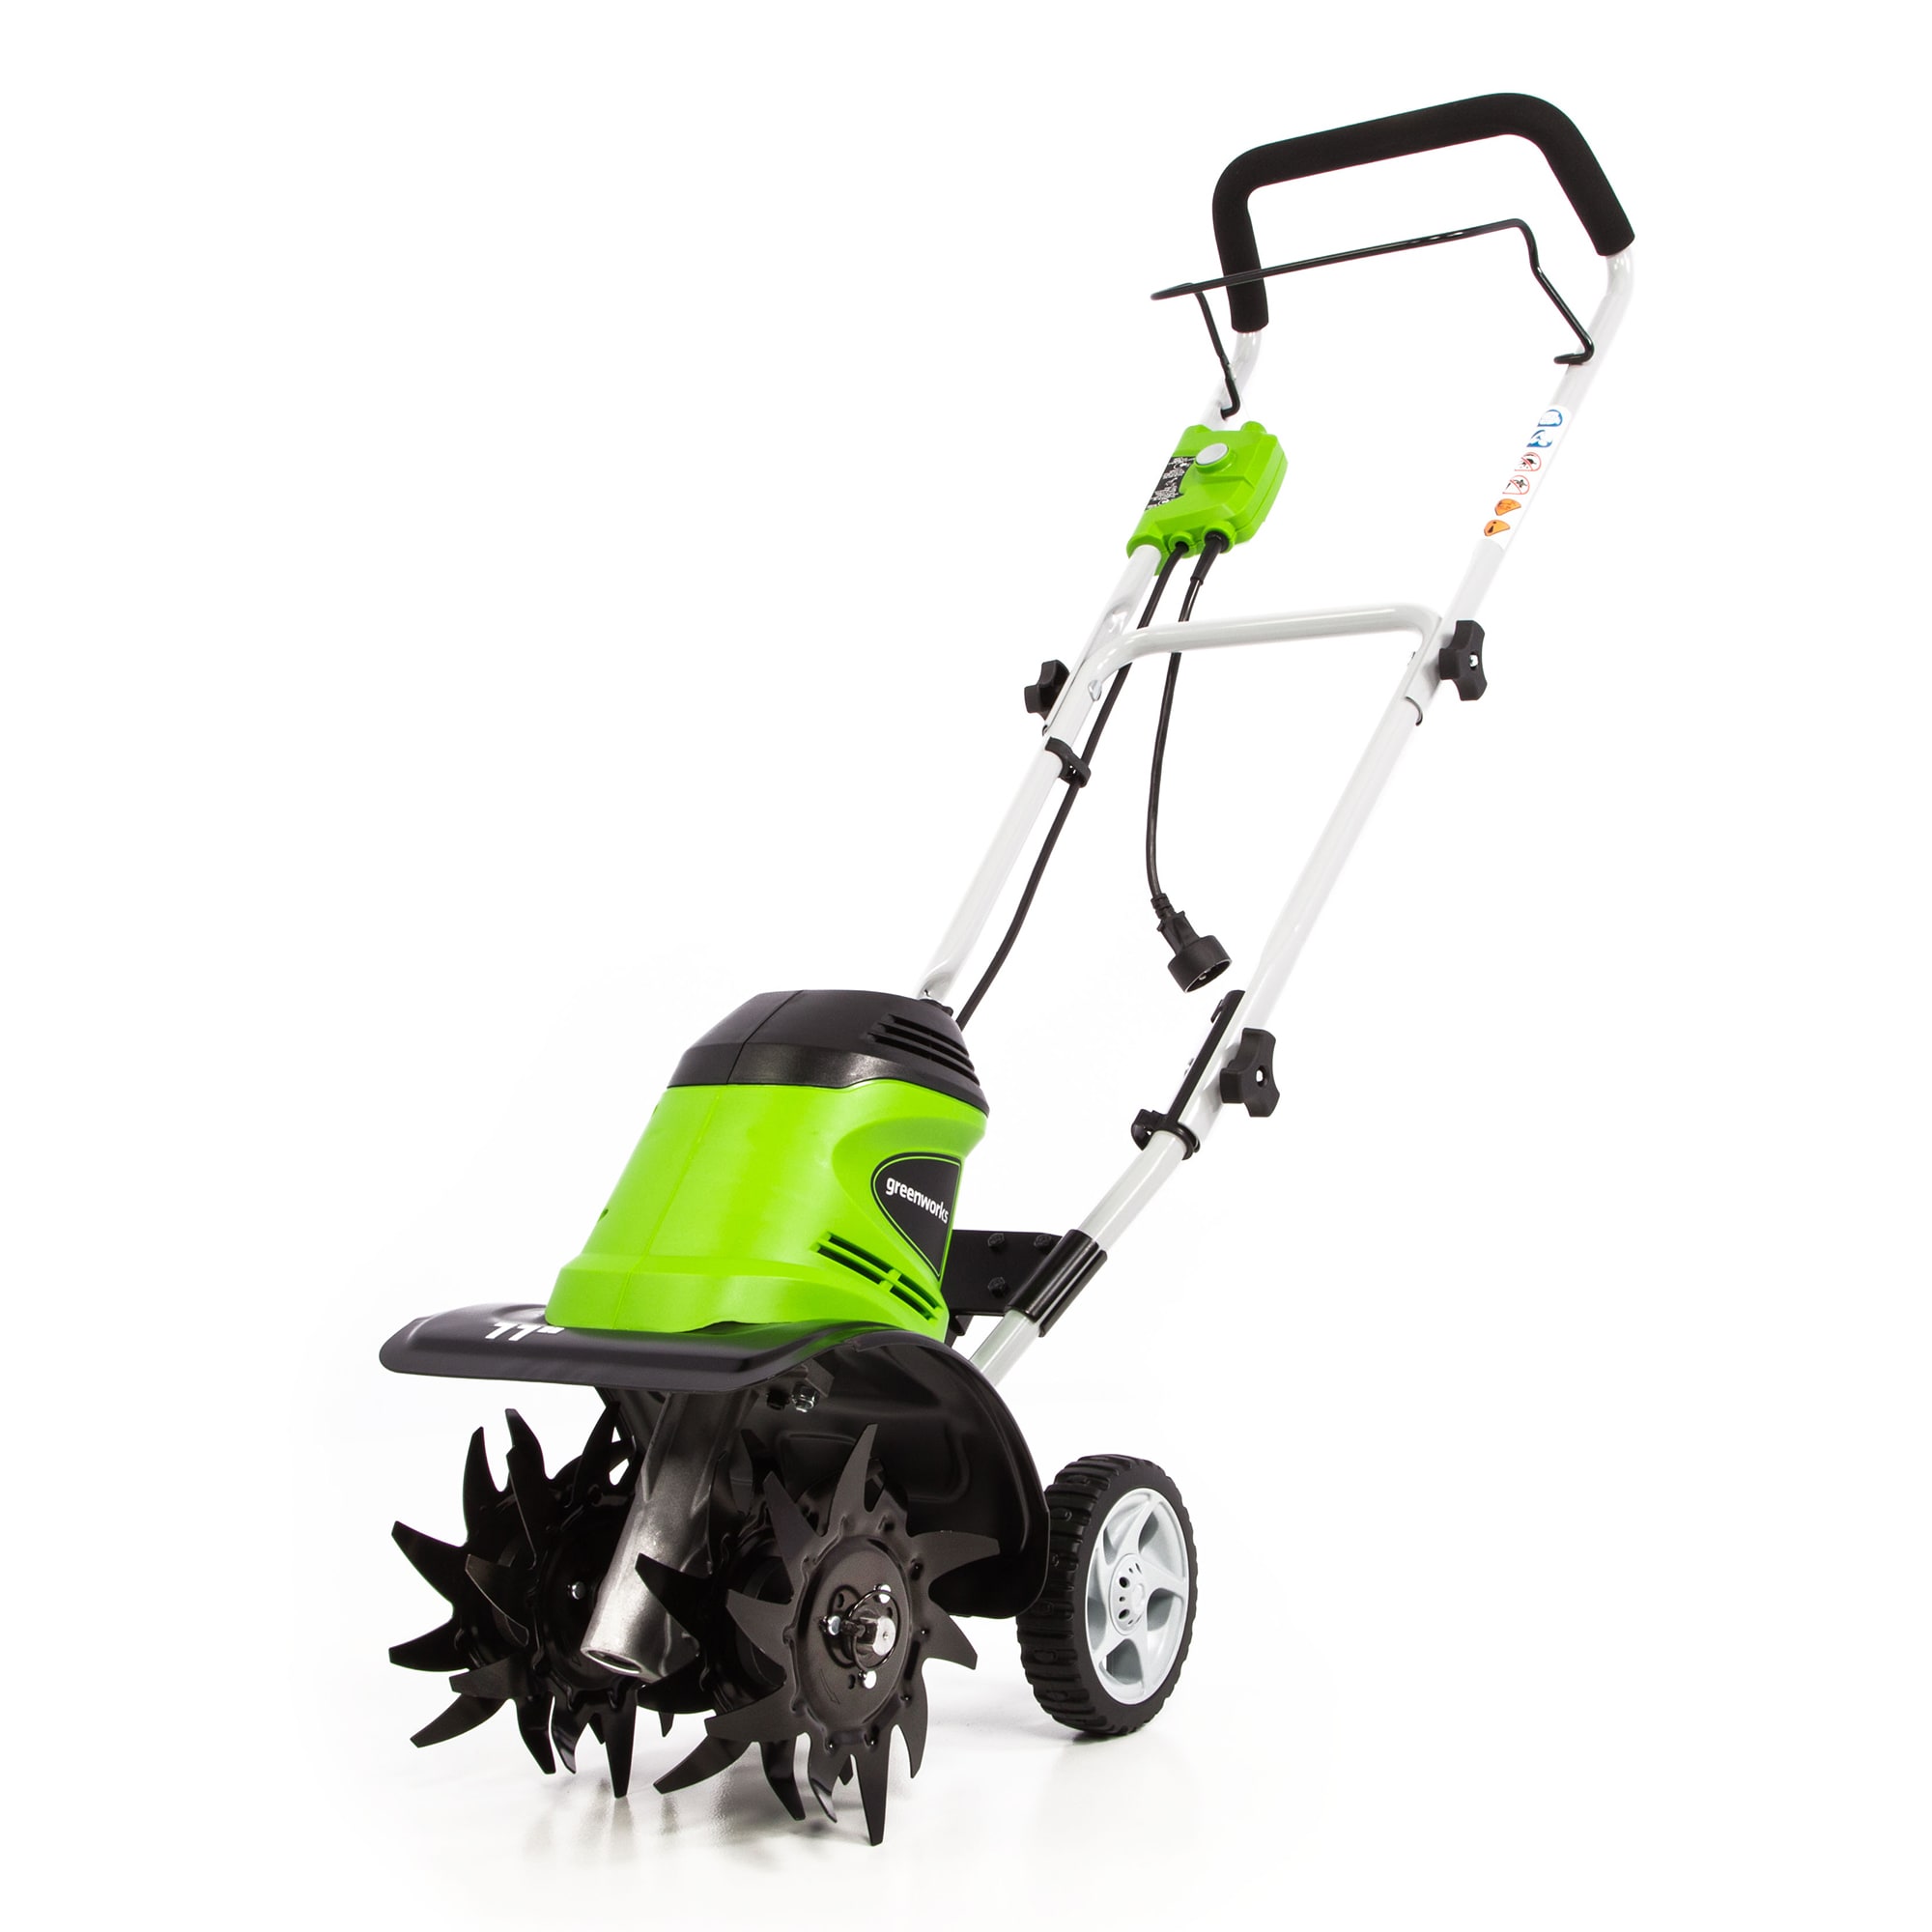 Corded Electric Cultivators